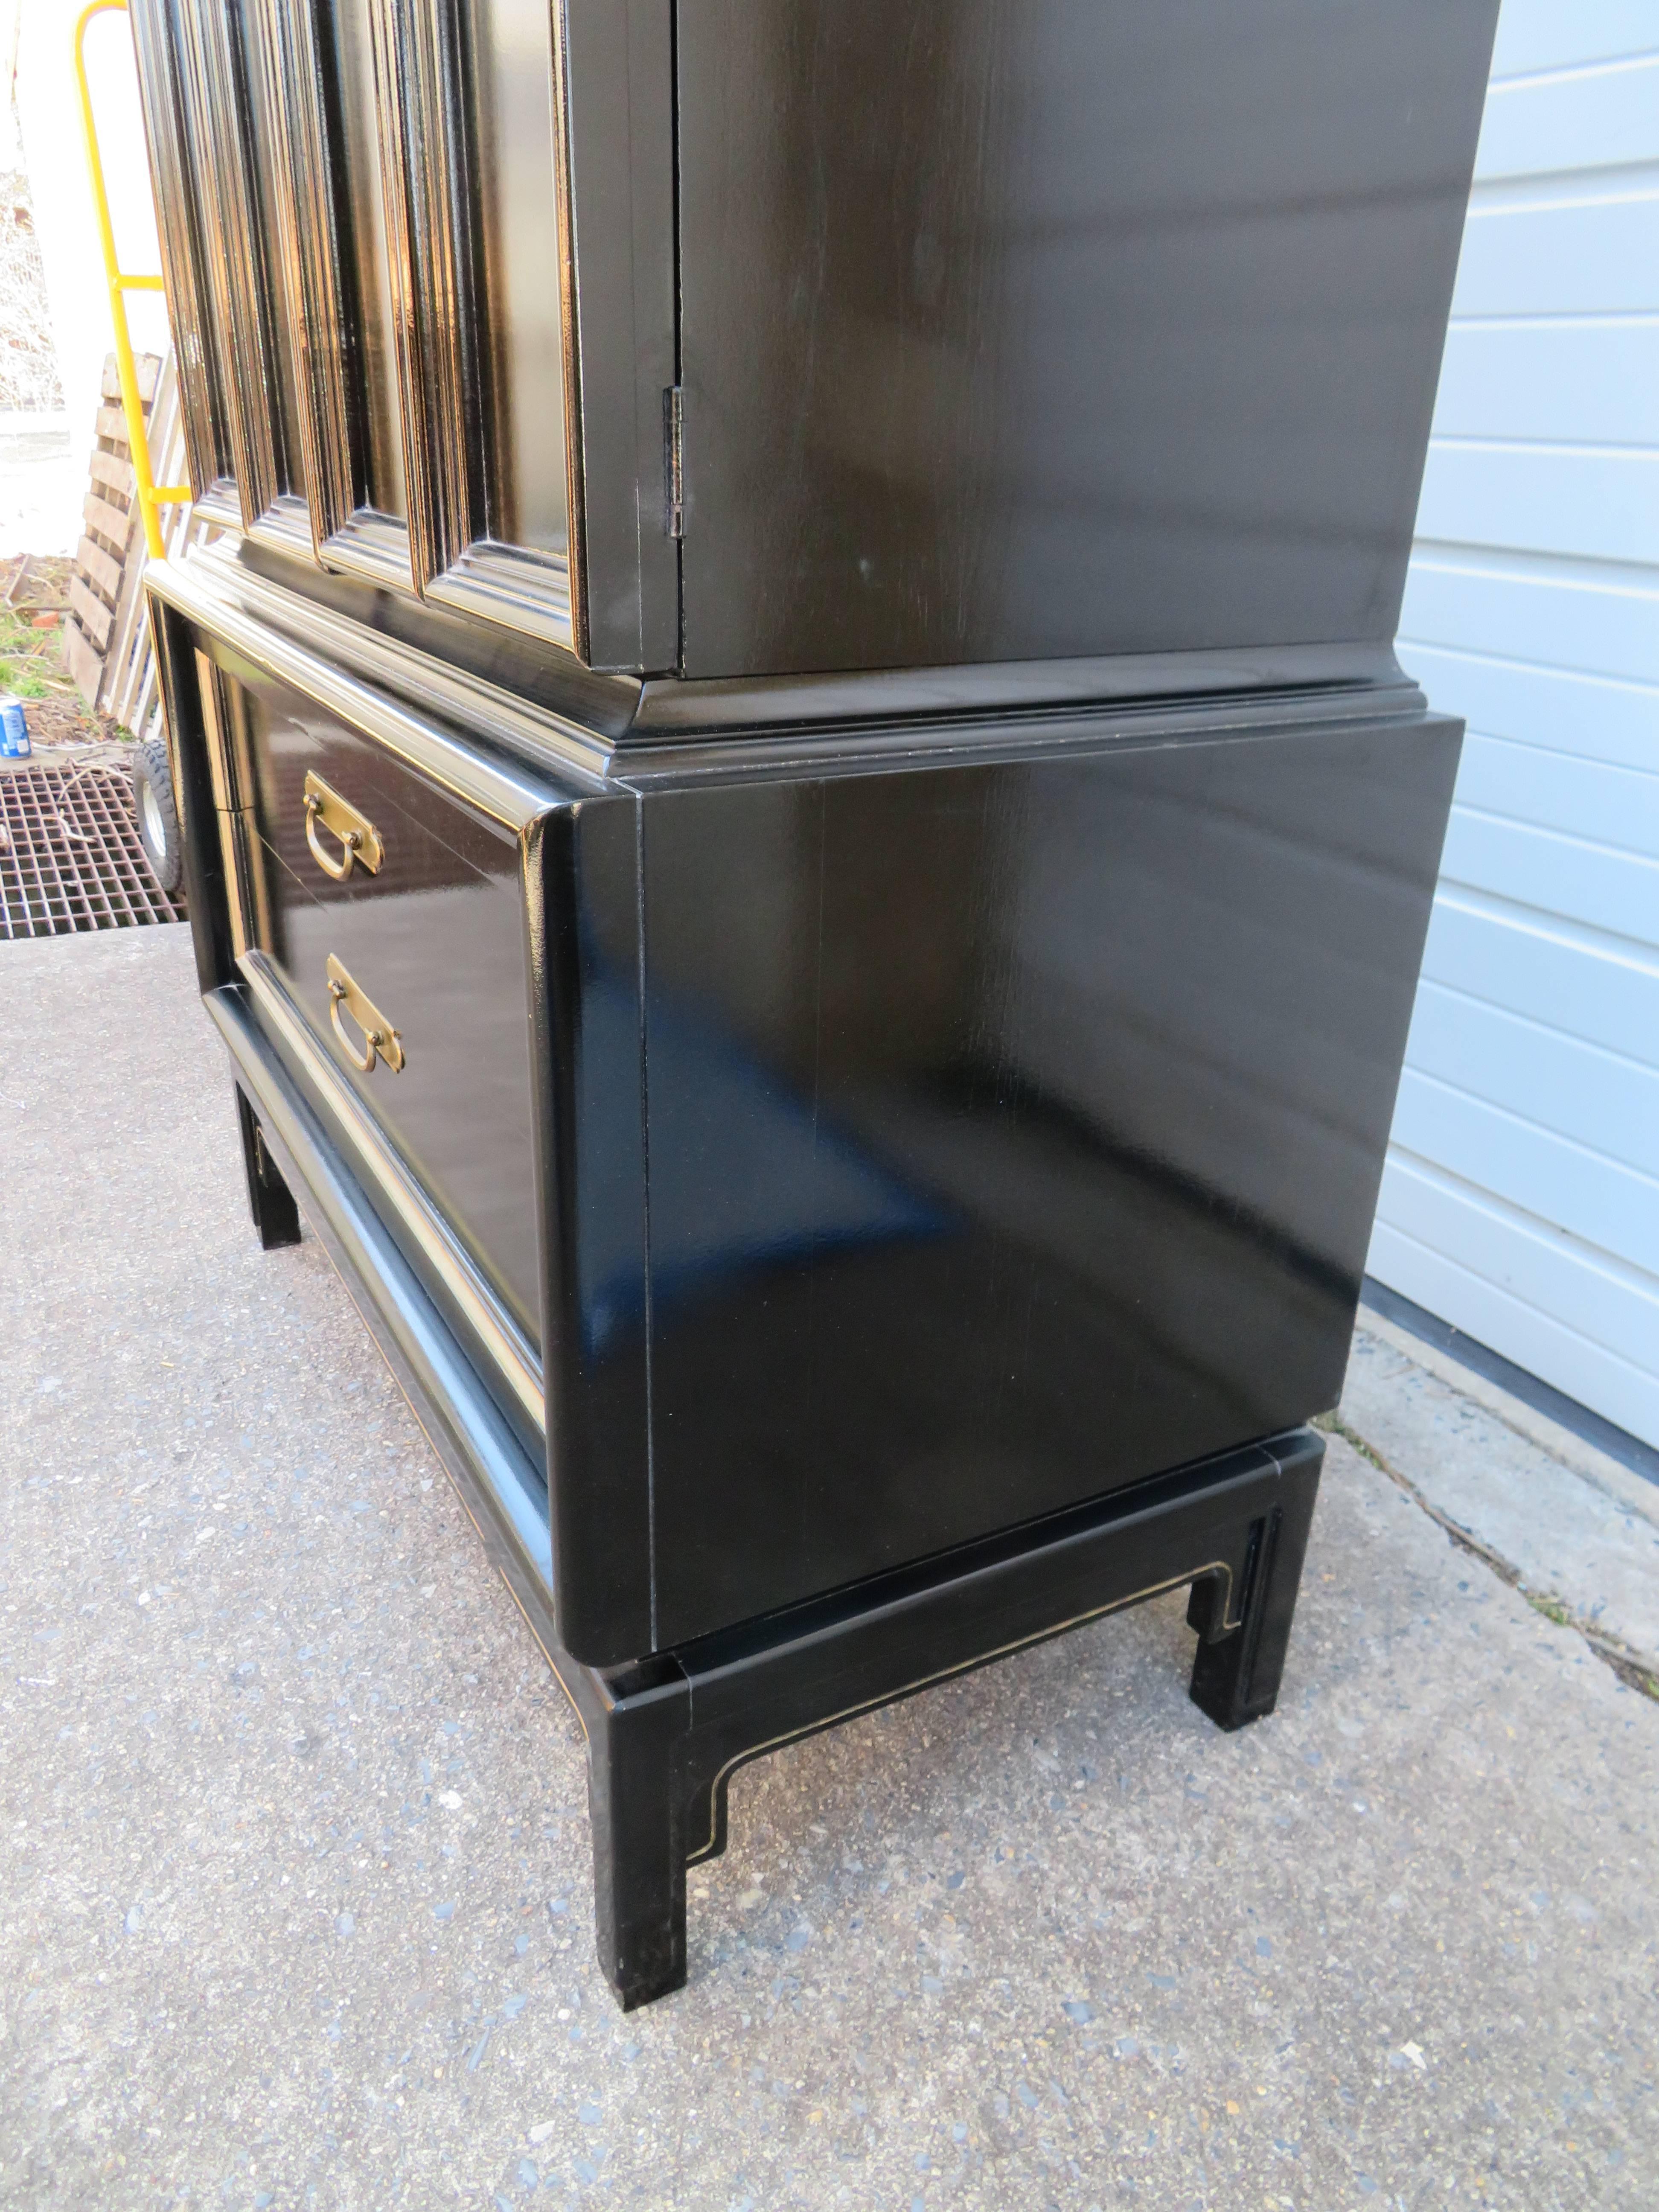 Stunning chinoiserie style black lacquered tall dresser. Check out all the storage options behind those doors-boy they sure don't make pieces like this anymore! We love all the brass and gold details-just fabulous.